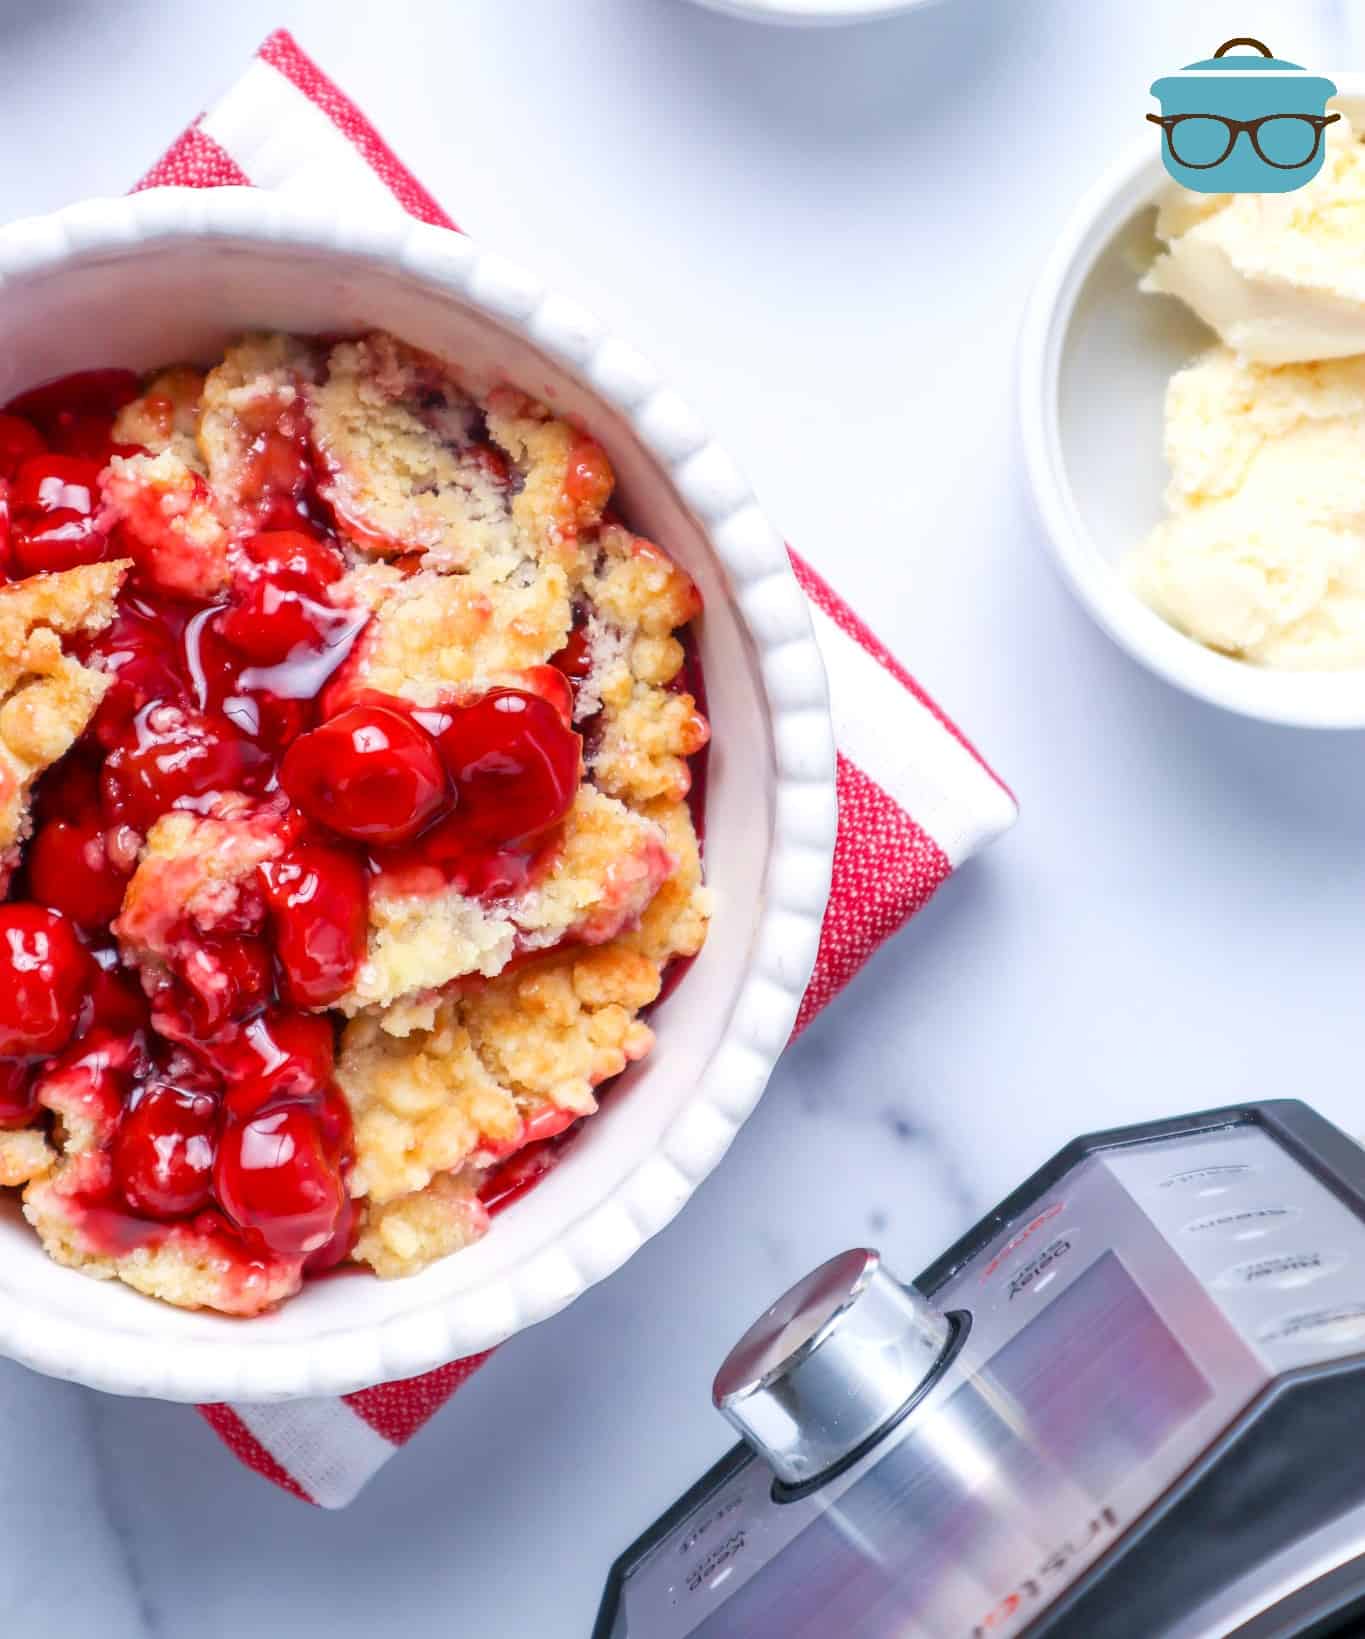 Instant Pot Cherry Cobbler shown served in a bowl with a side of vanilla ice cream.